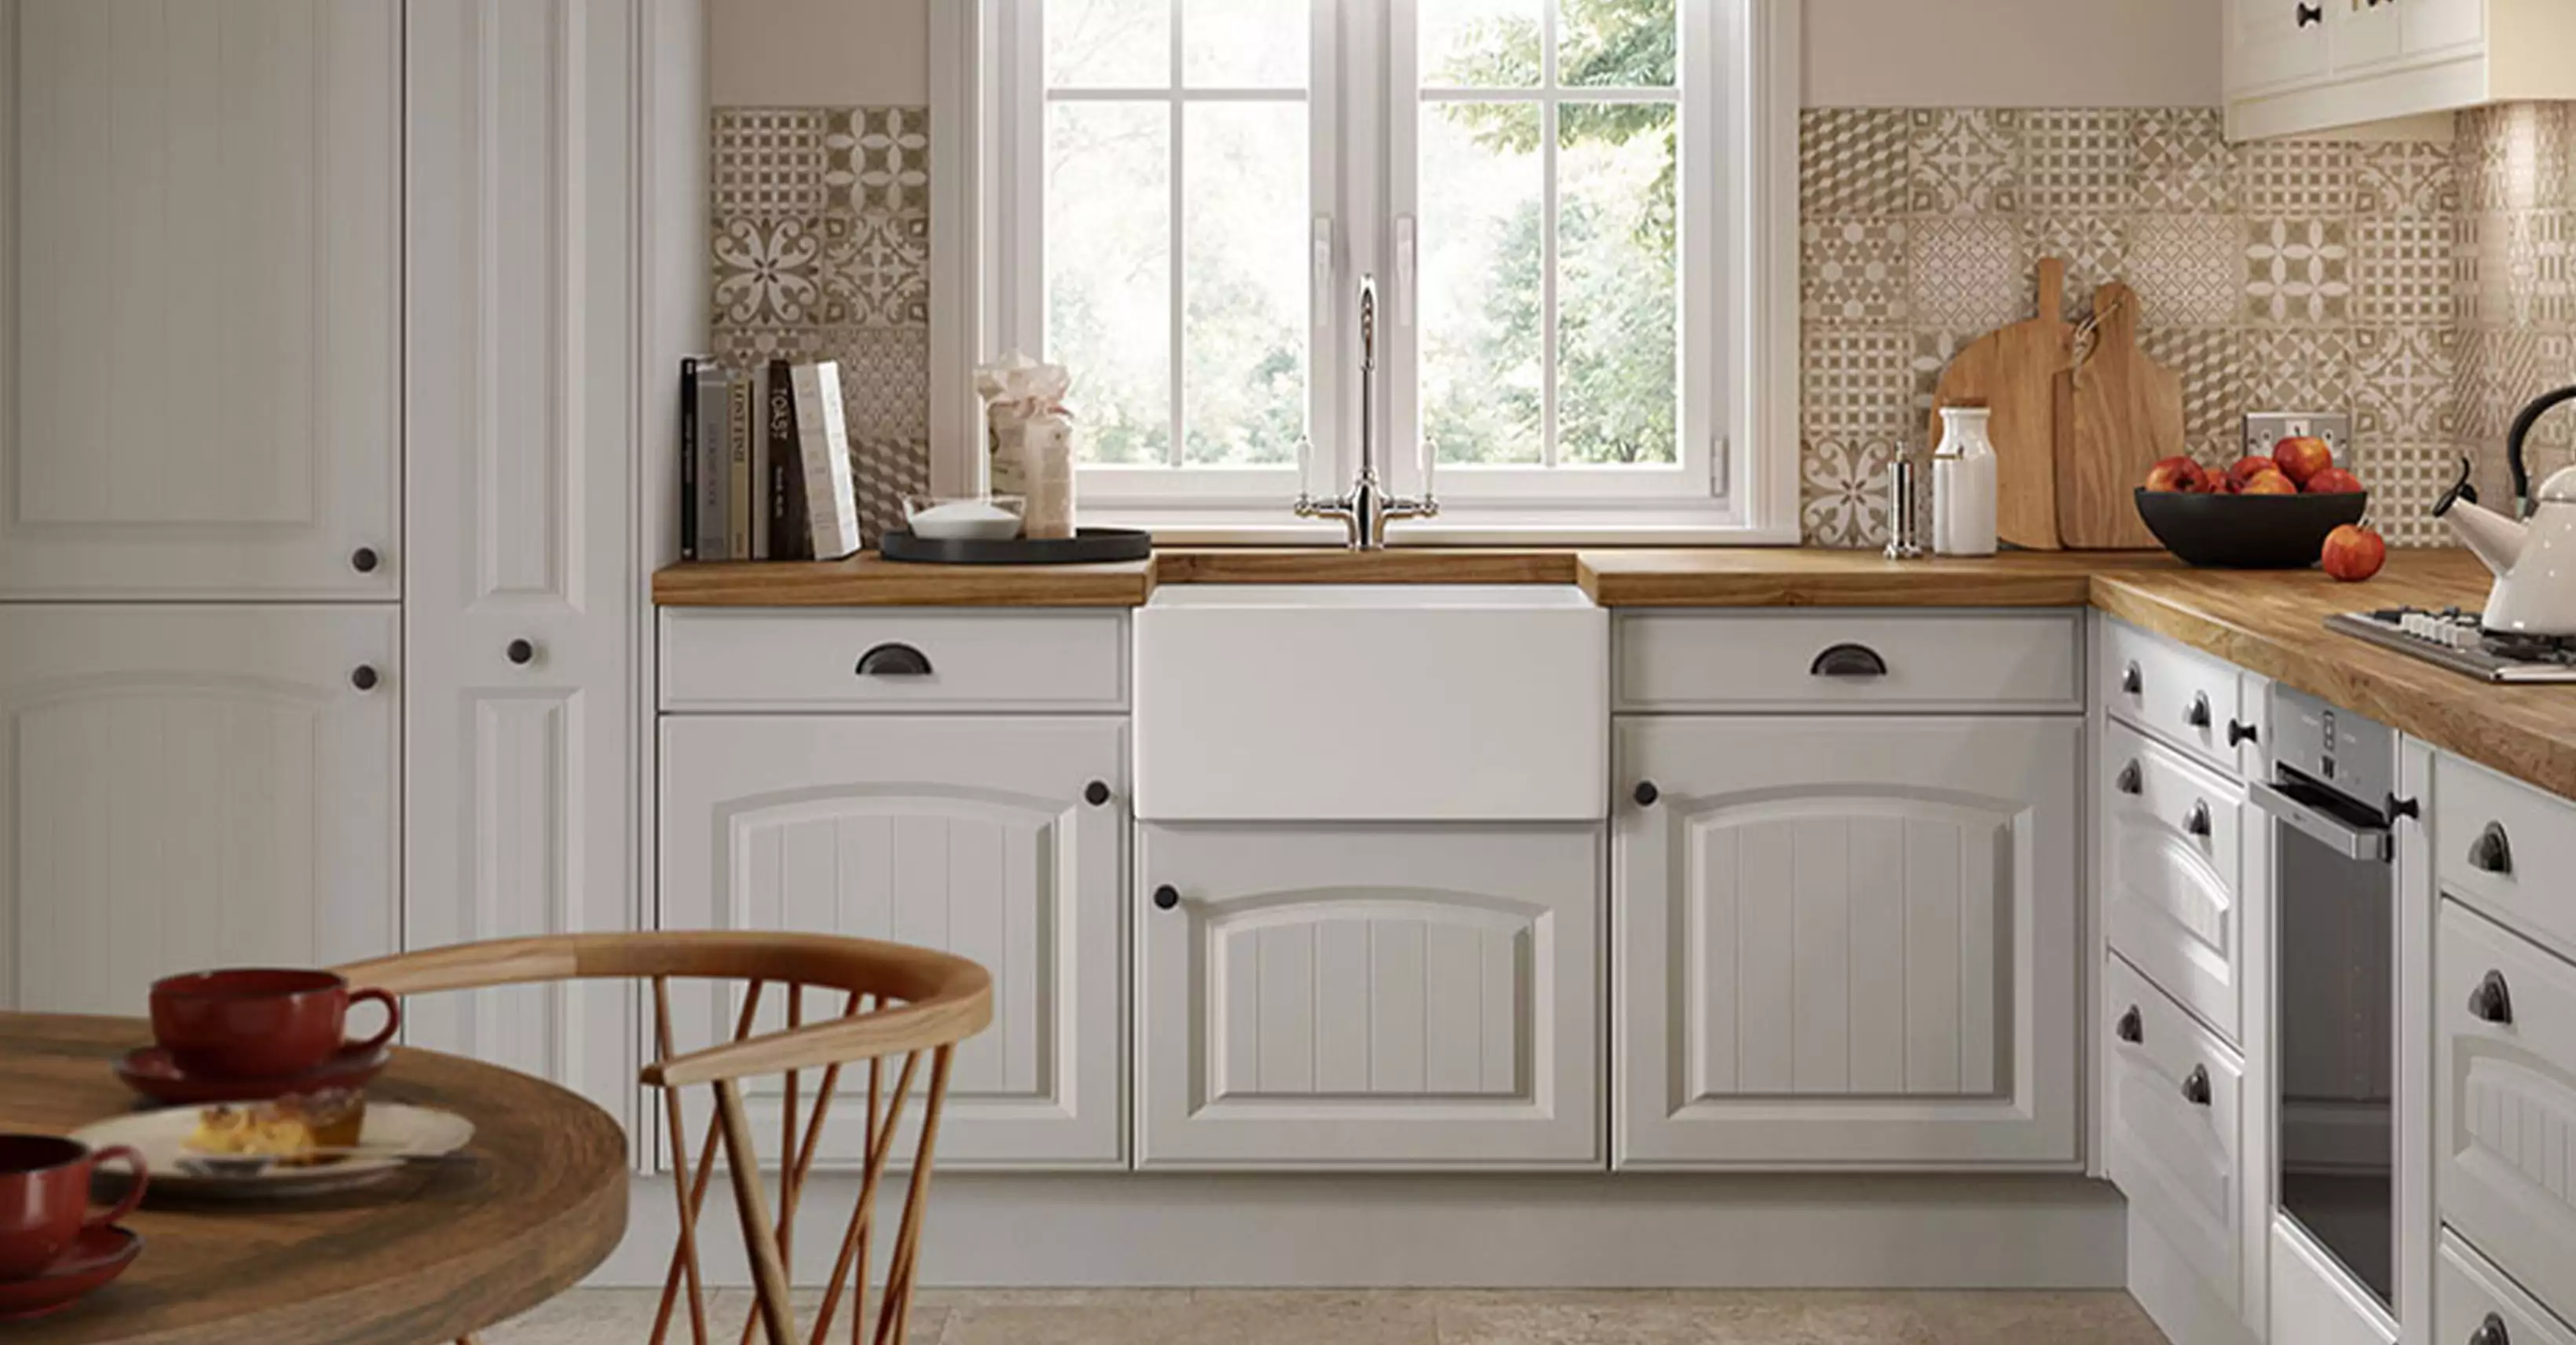 Stanhope Classic Kitchens Newcastle & North East